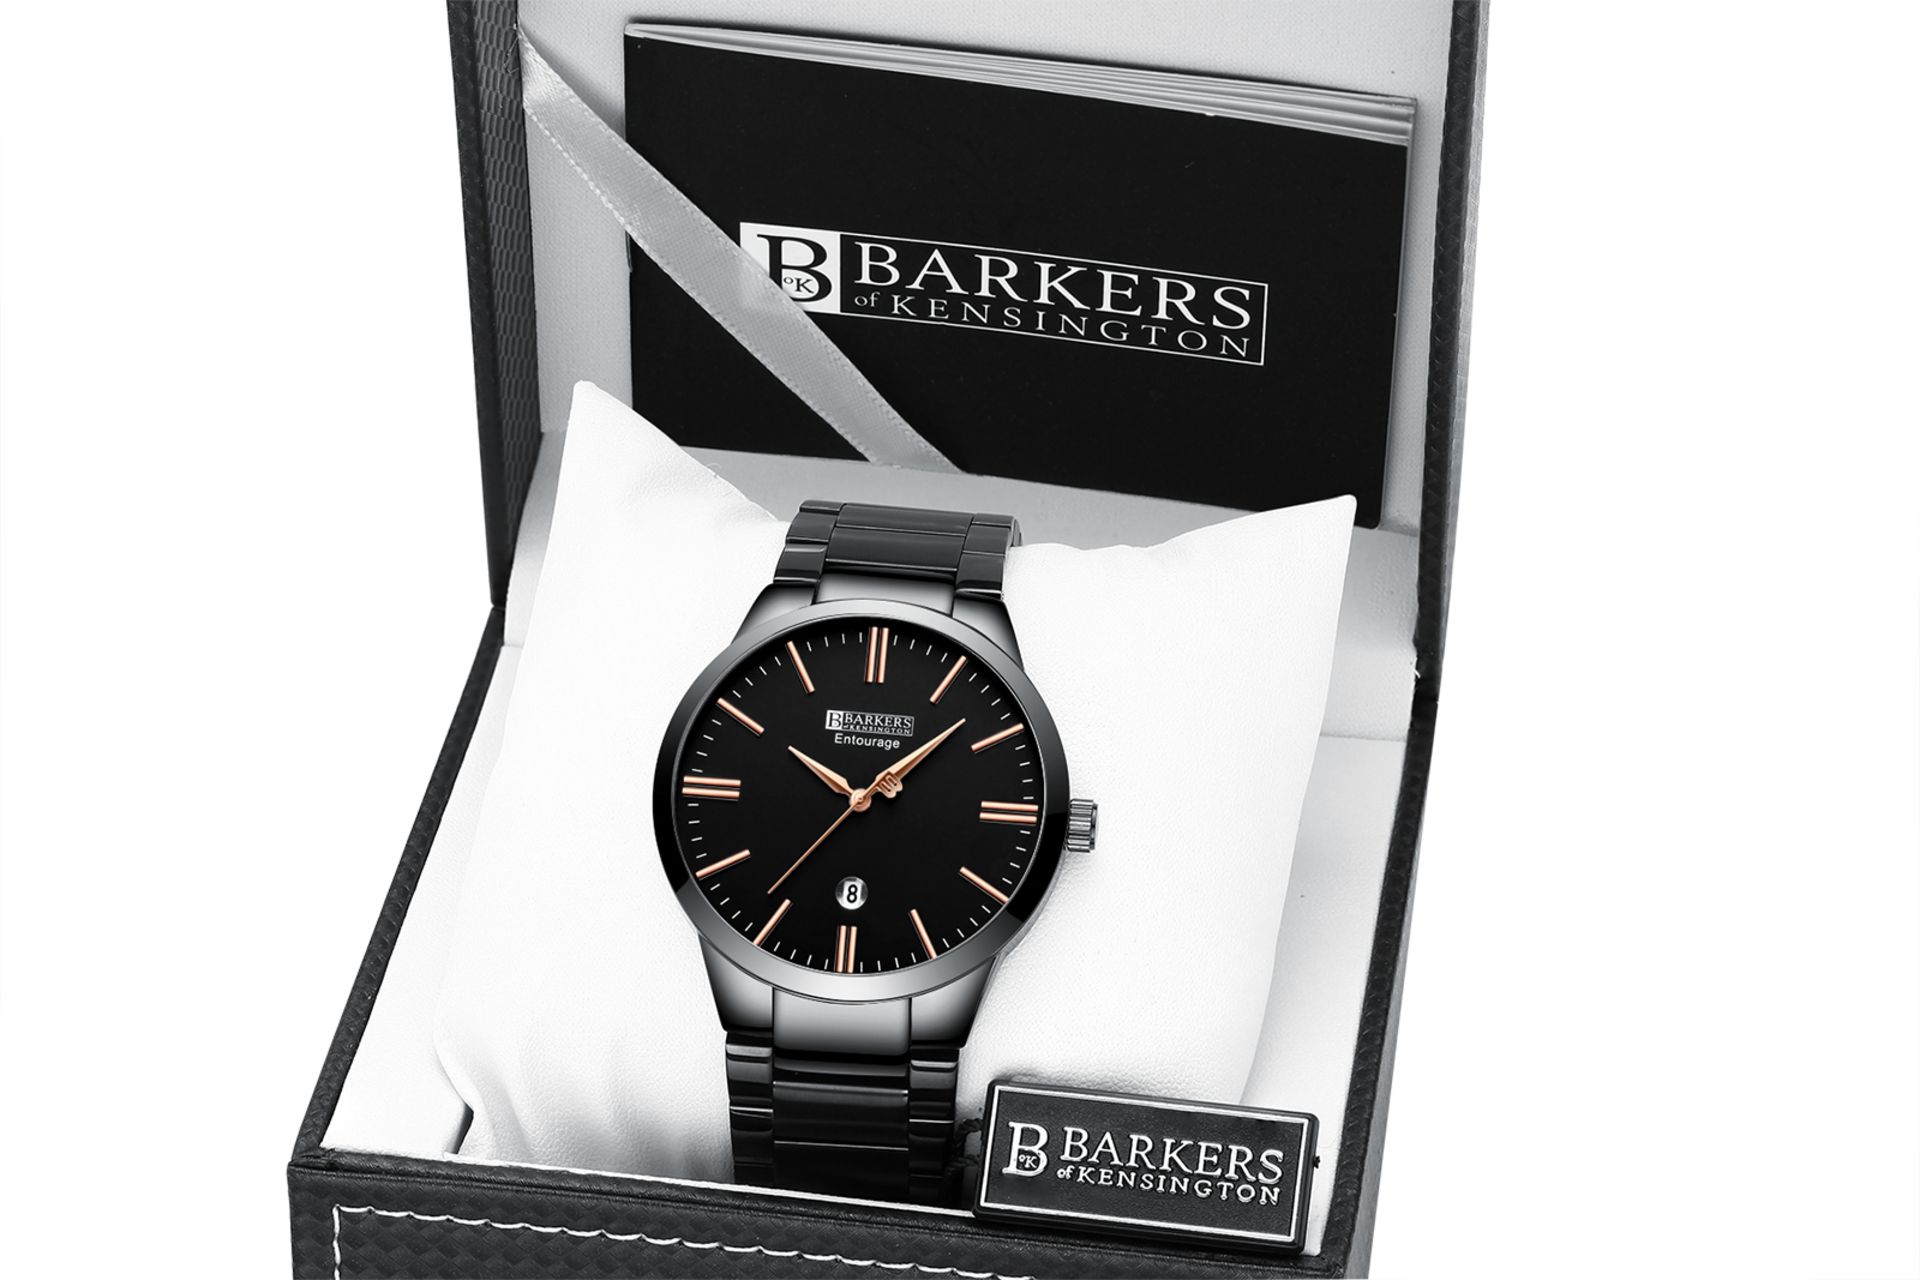 V Brand New Barkers Of Kensington Gents Entourage Watch with Two Tone Black Bracelet Strap and